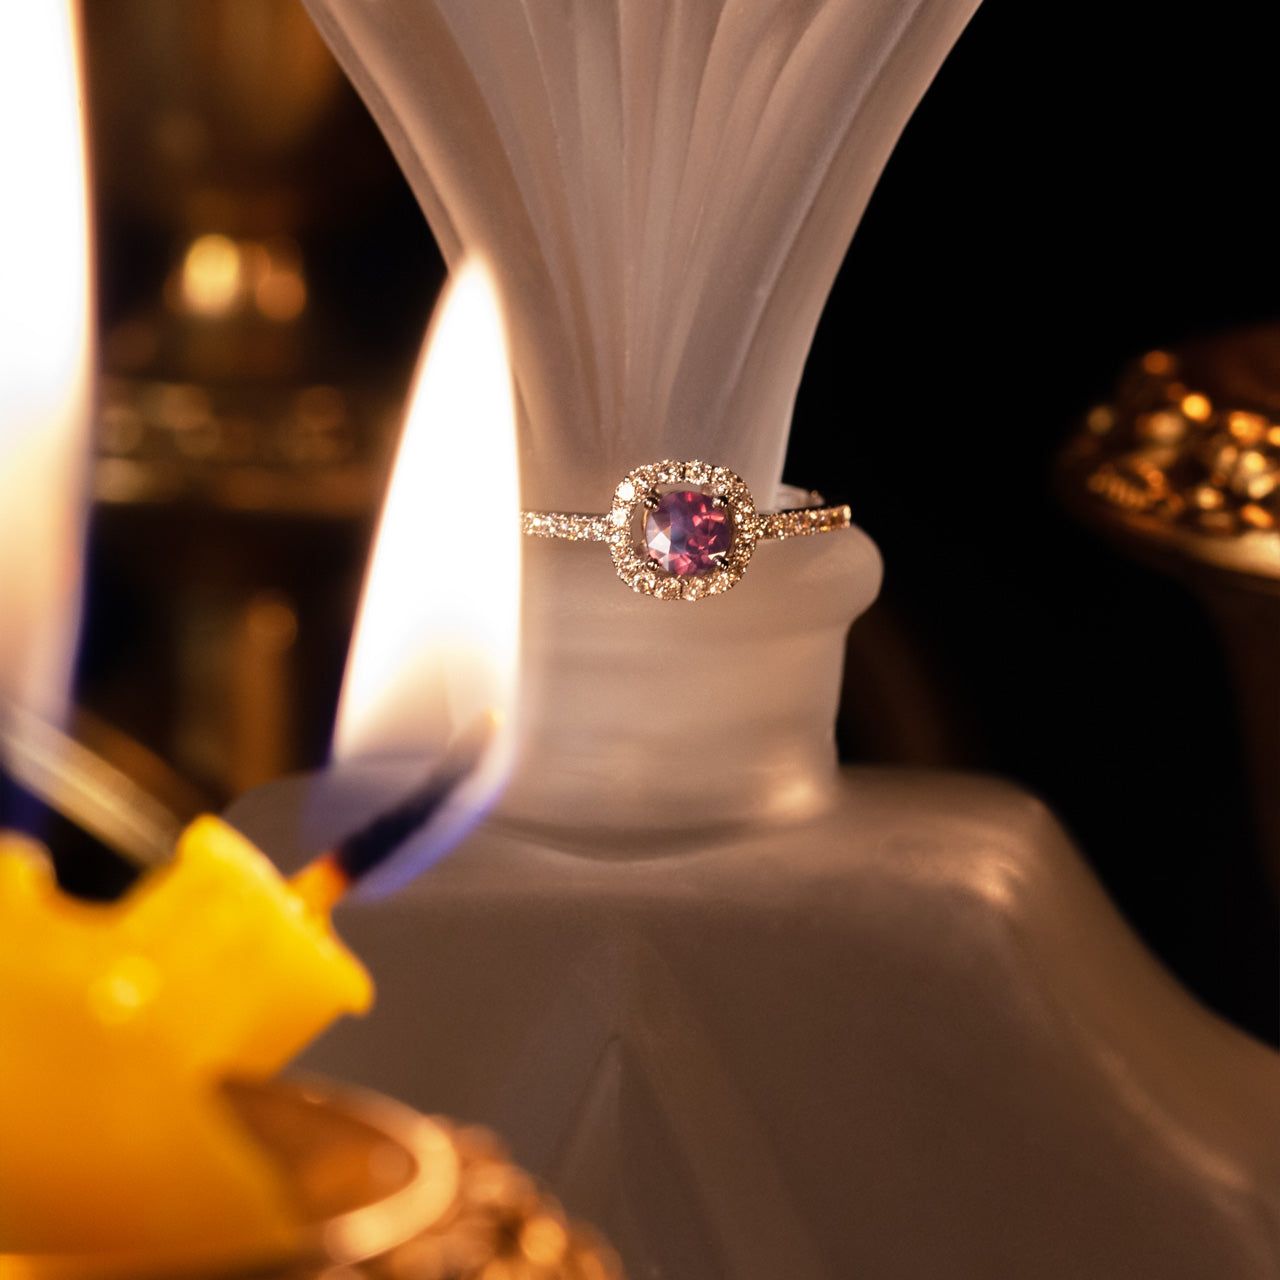 0.45ct natural alexandrite 18k white gold ring displayed on a candle for ambiance